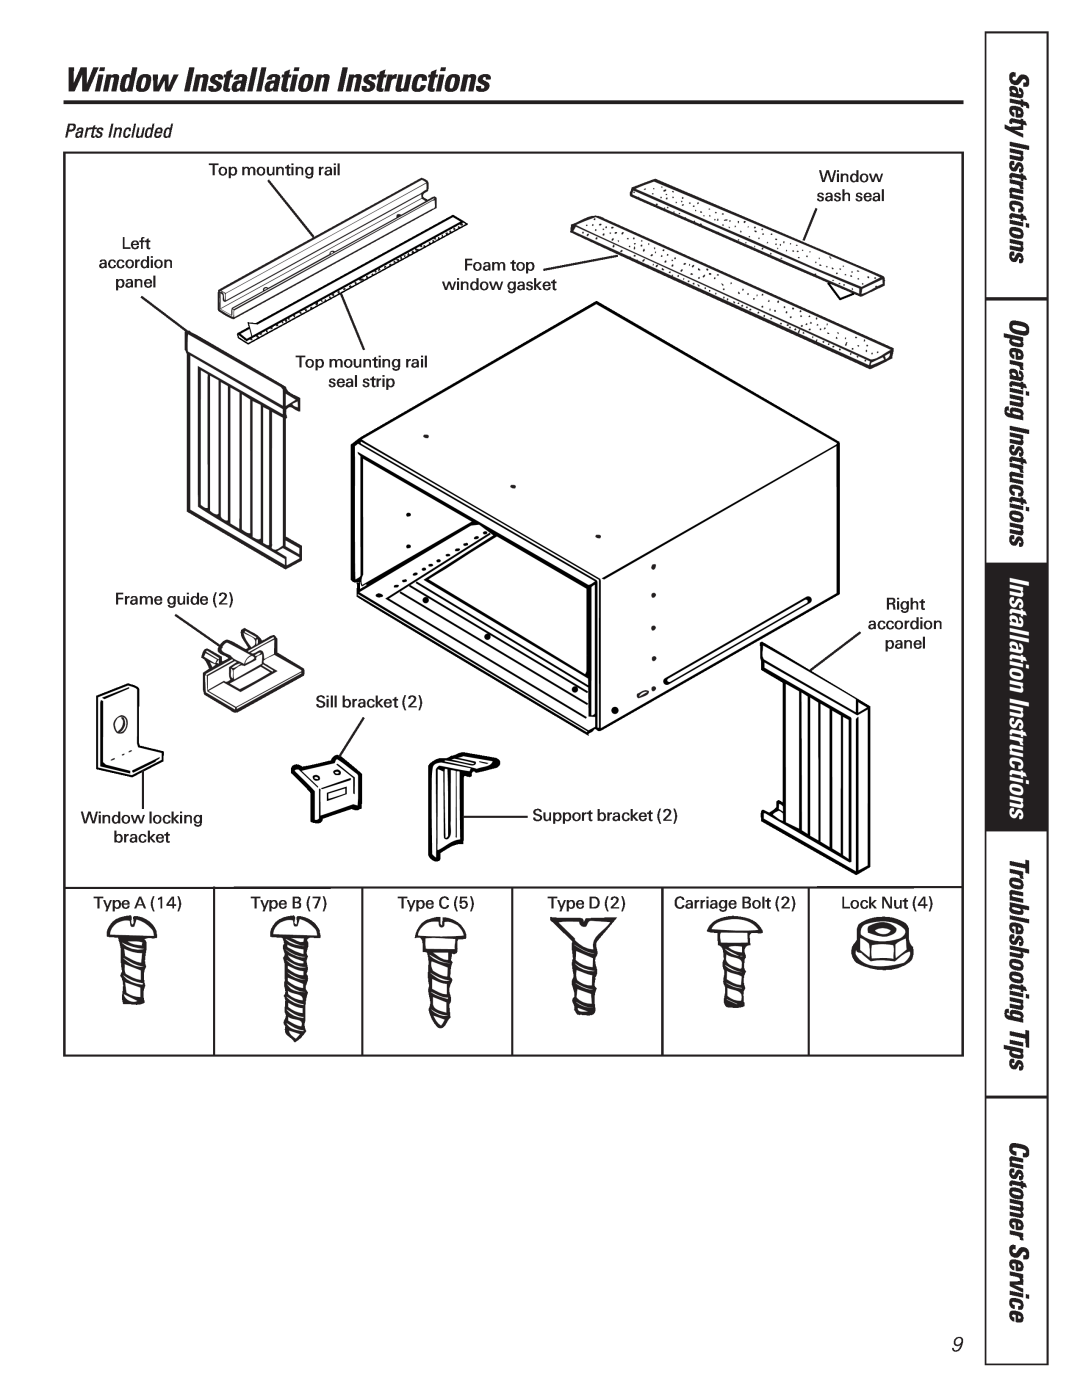 GE AG_14-14, AG_18-18, 000 BTU owner manual Window Installation Instructions, Customer Service, Parts Included 